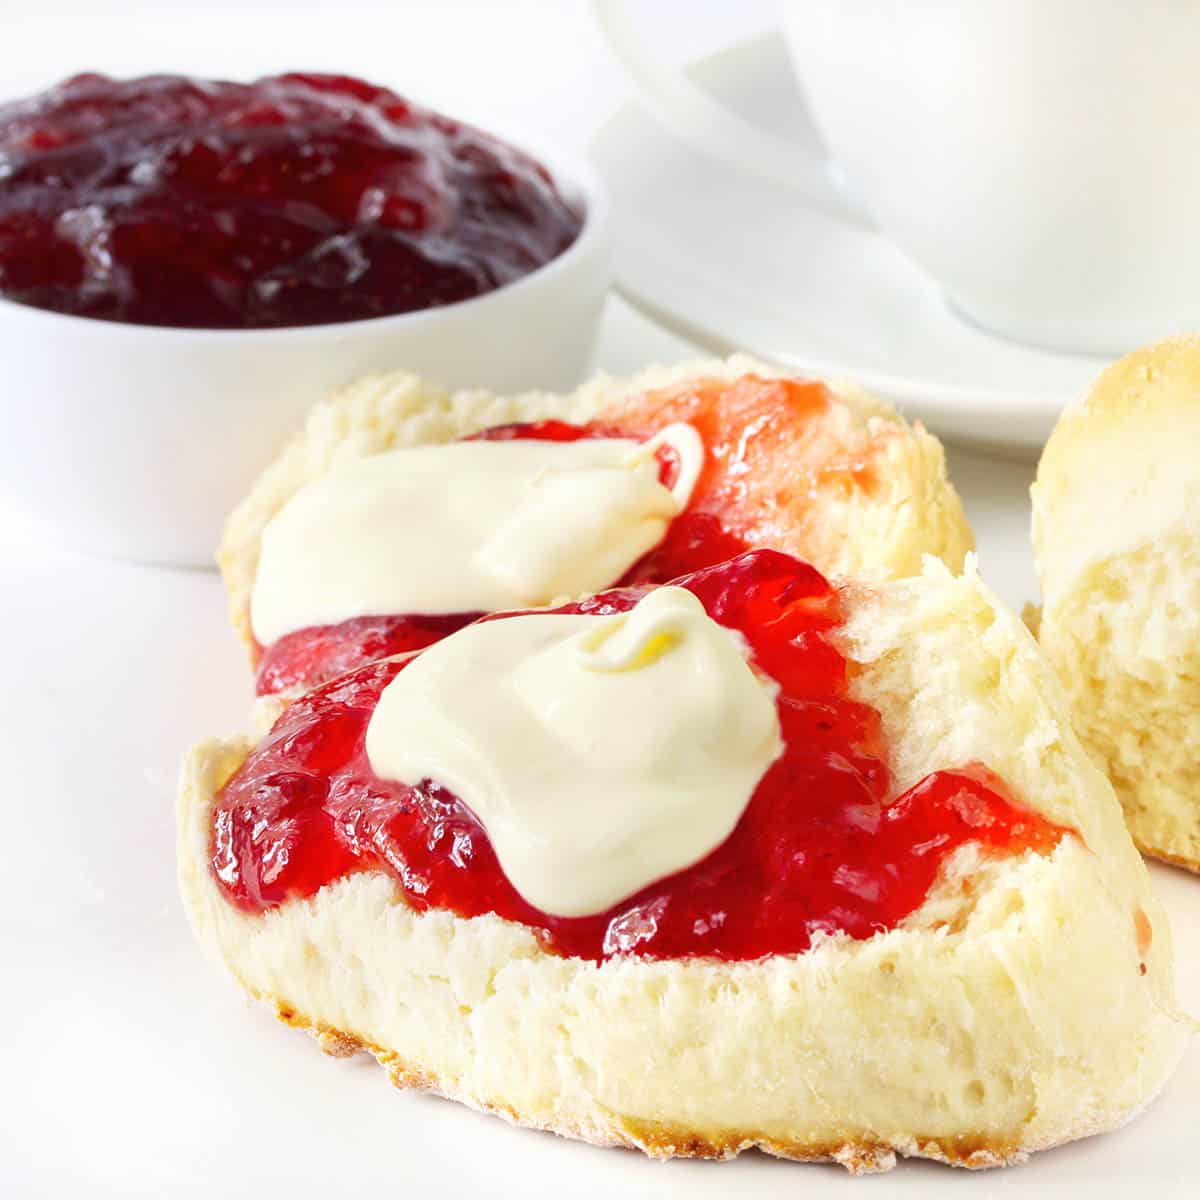 Scones with Jam and Cream on white background